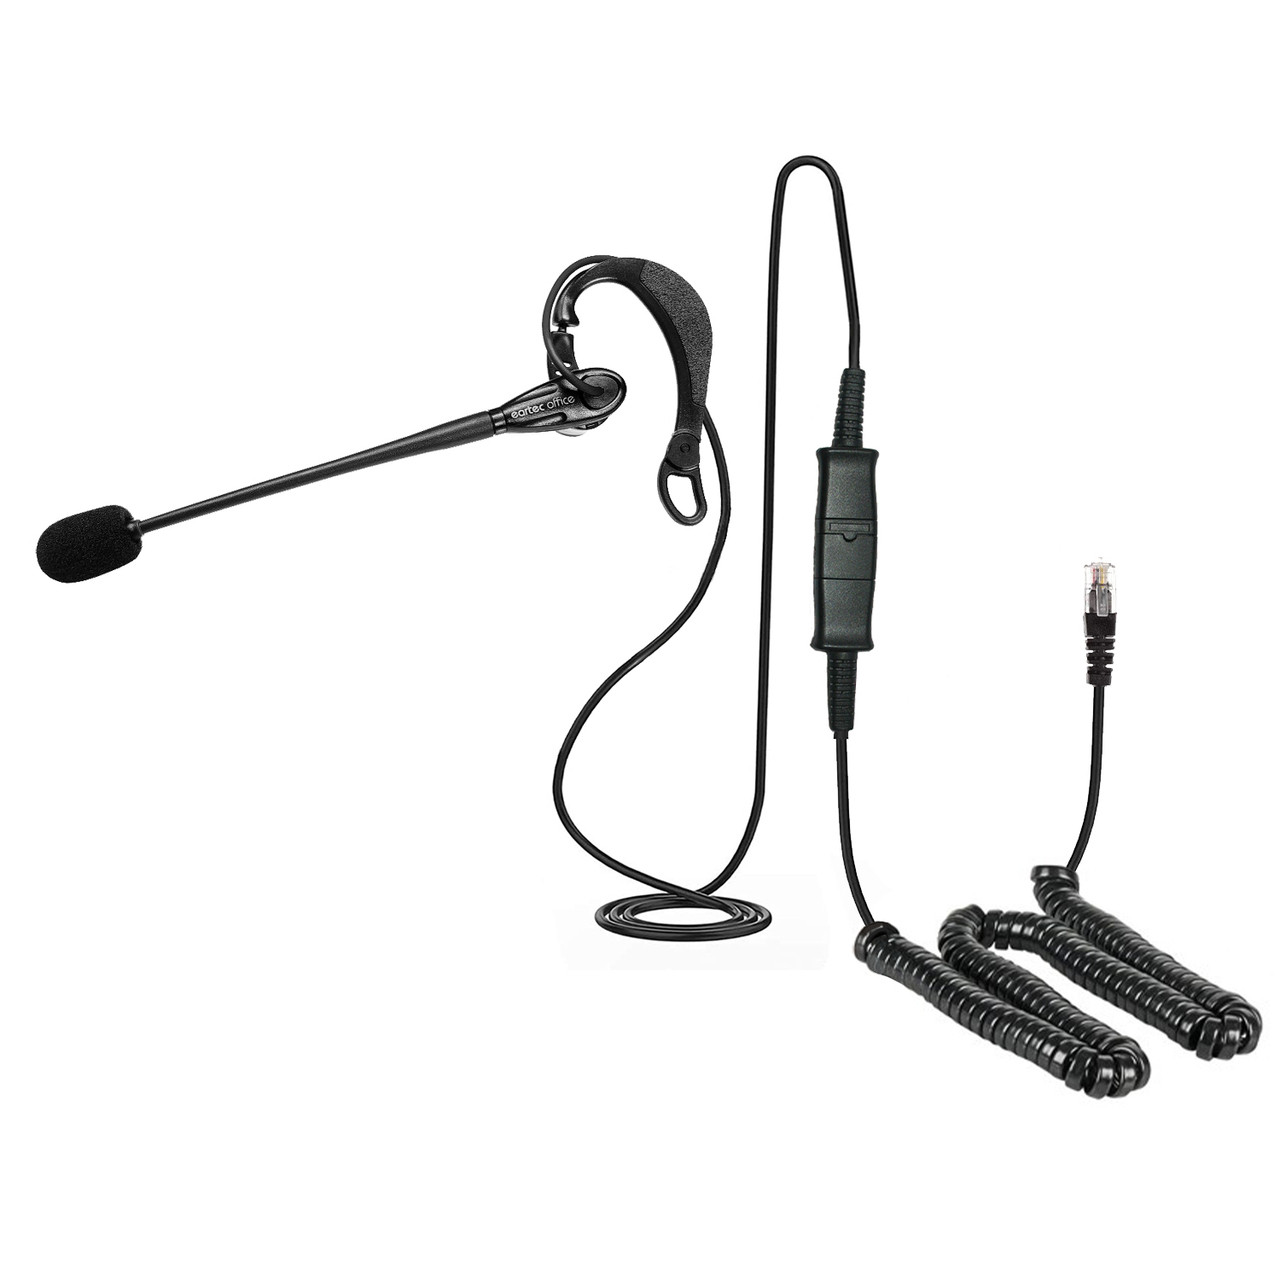 Aastra M760e Phone In-the-ear Headset - EAR200